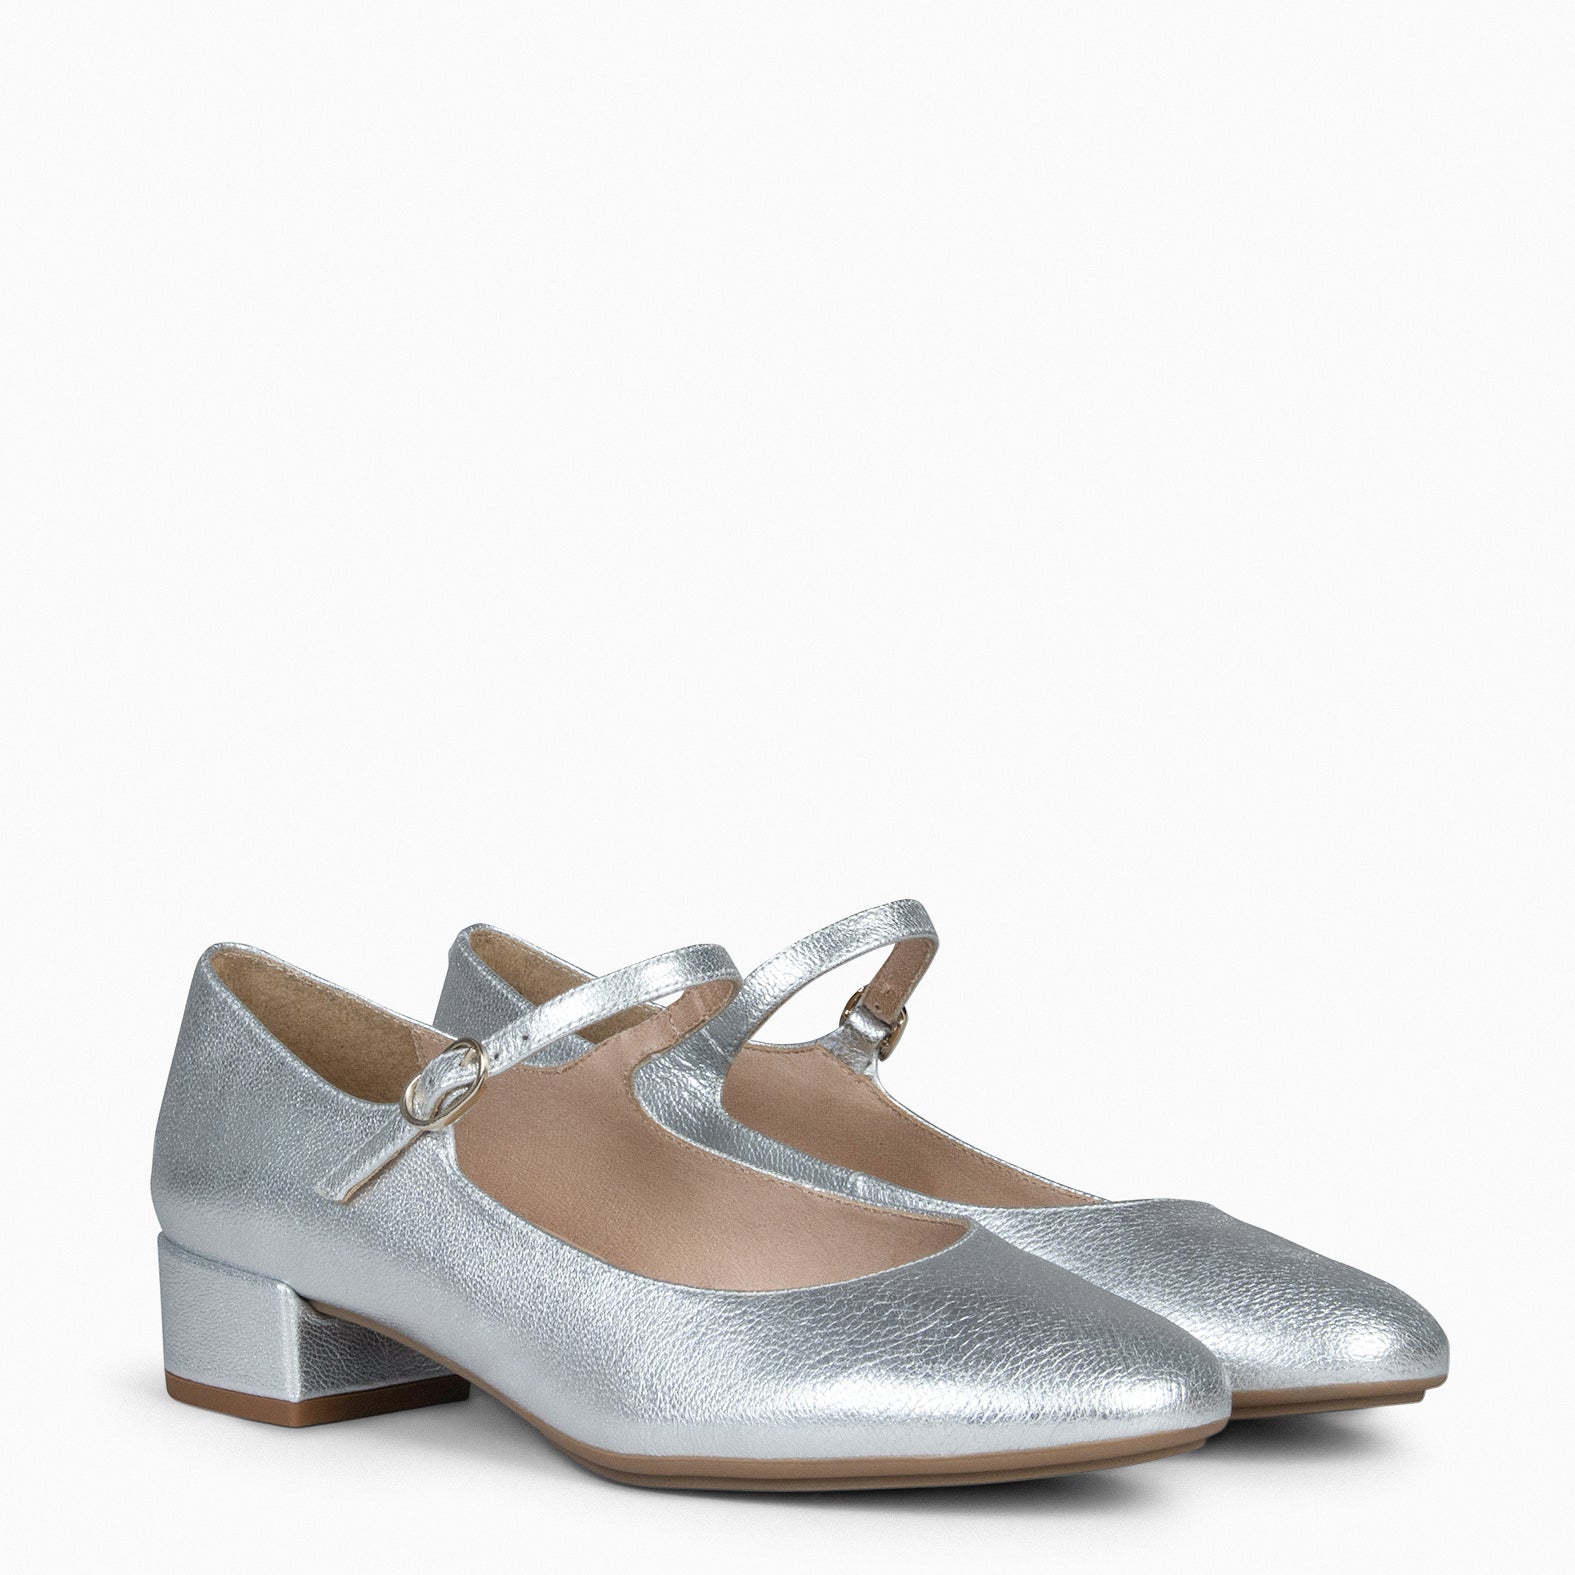 NORA – SILVER Mary-Janes with low heel 